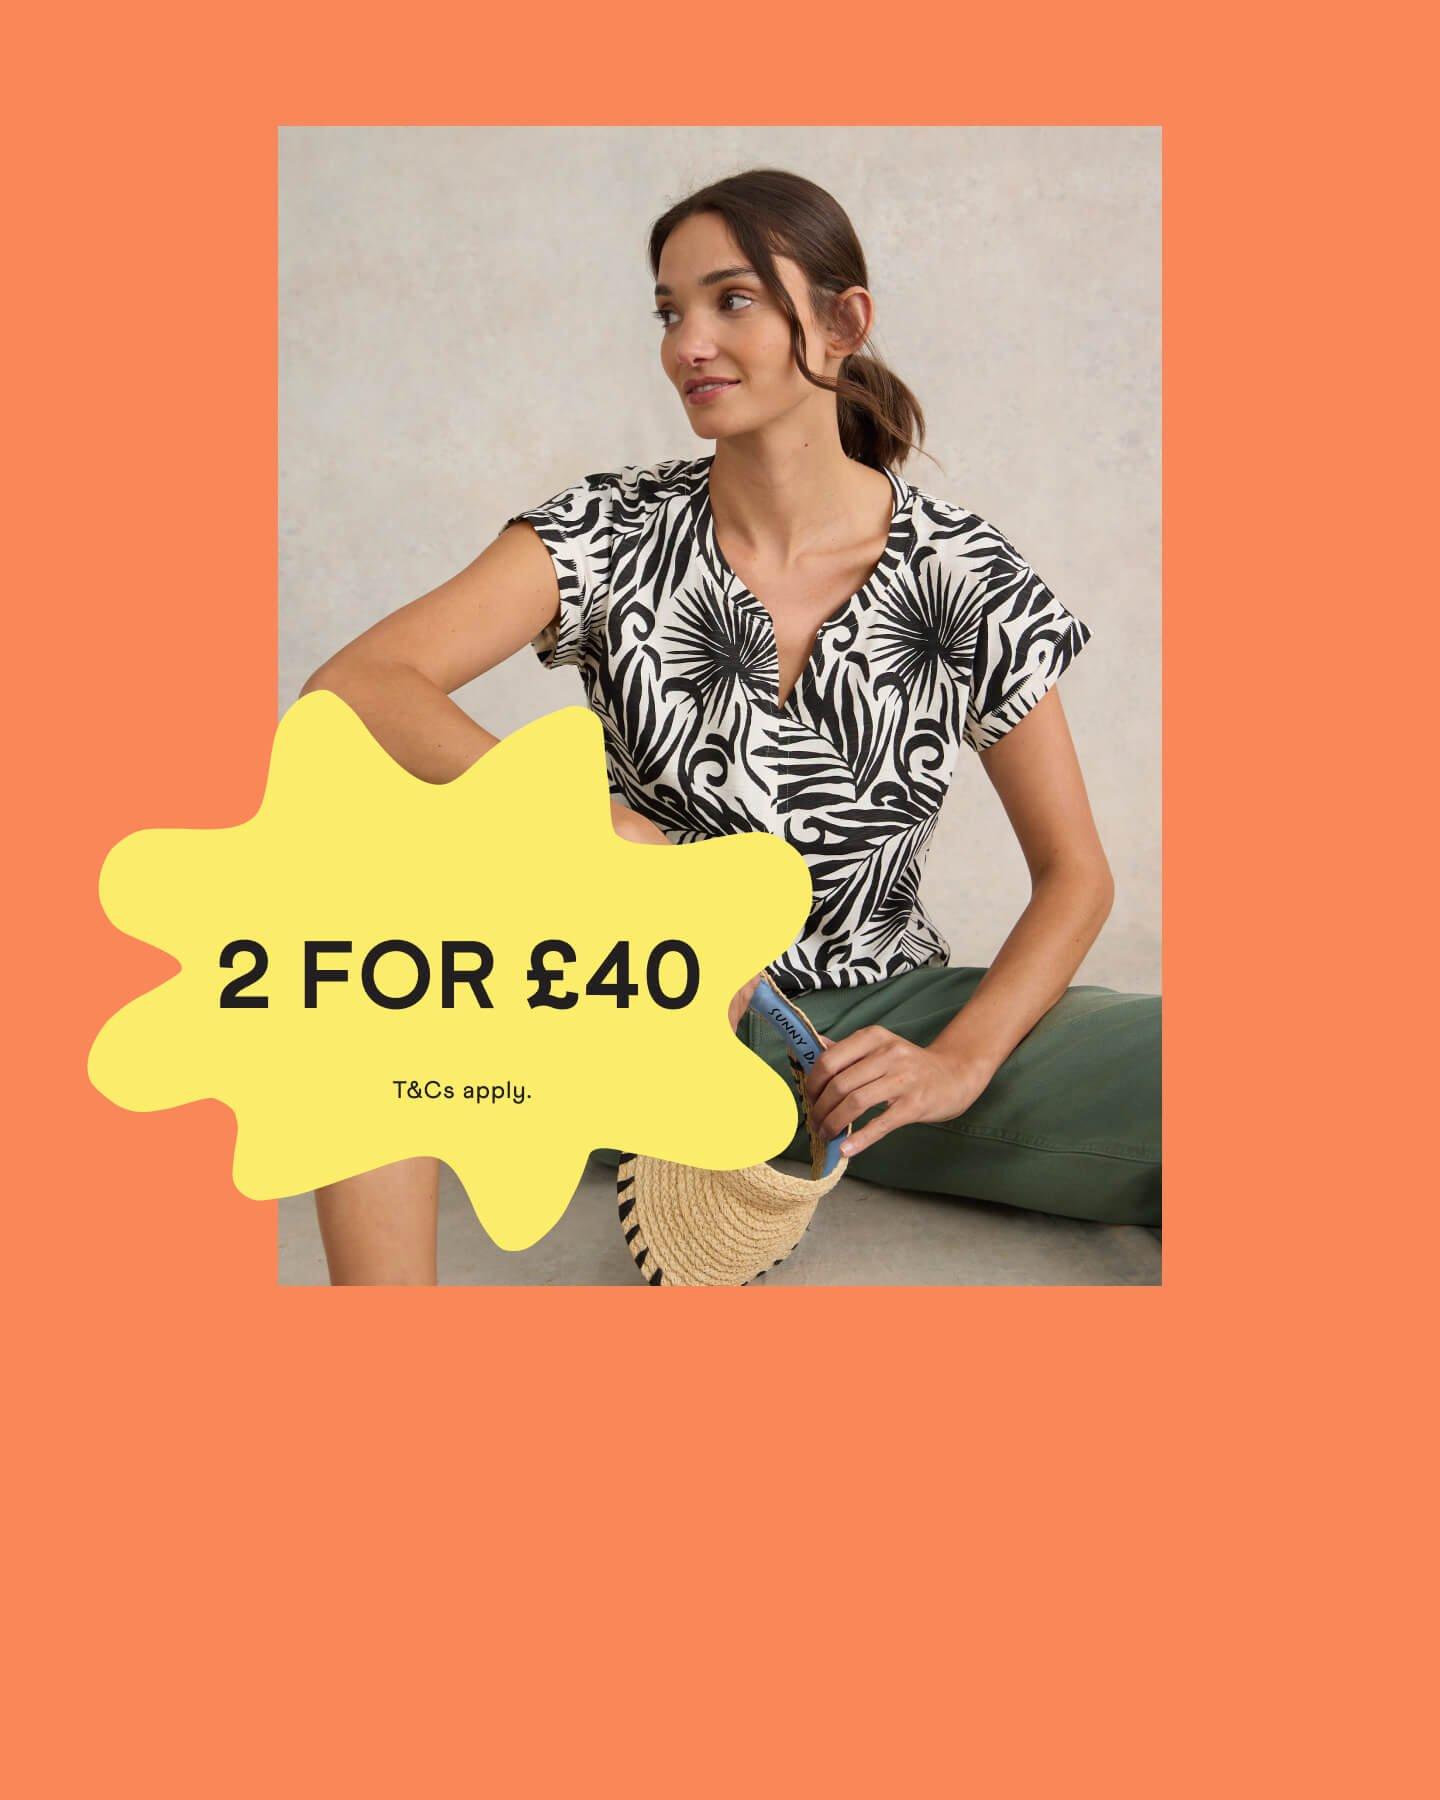 Woman in a black and white t-shirt with a '2 for £40' promotional banner